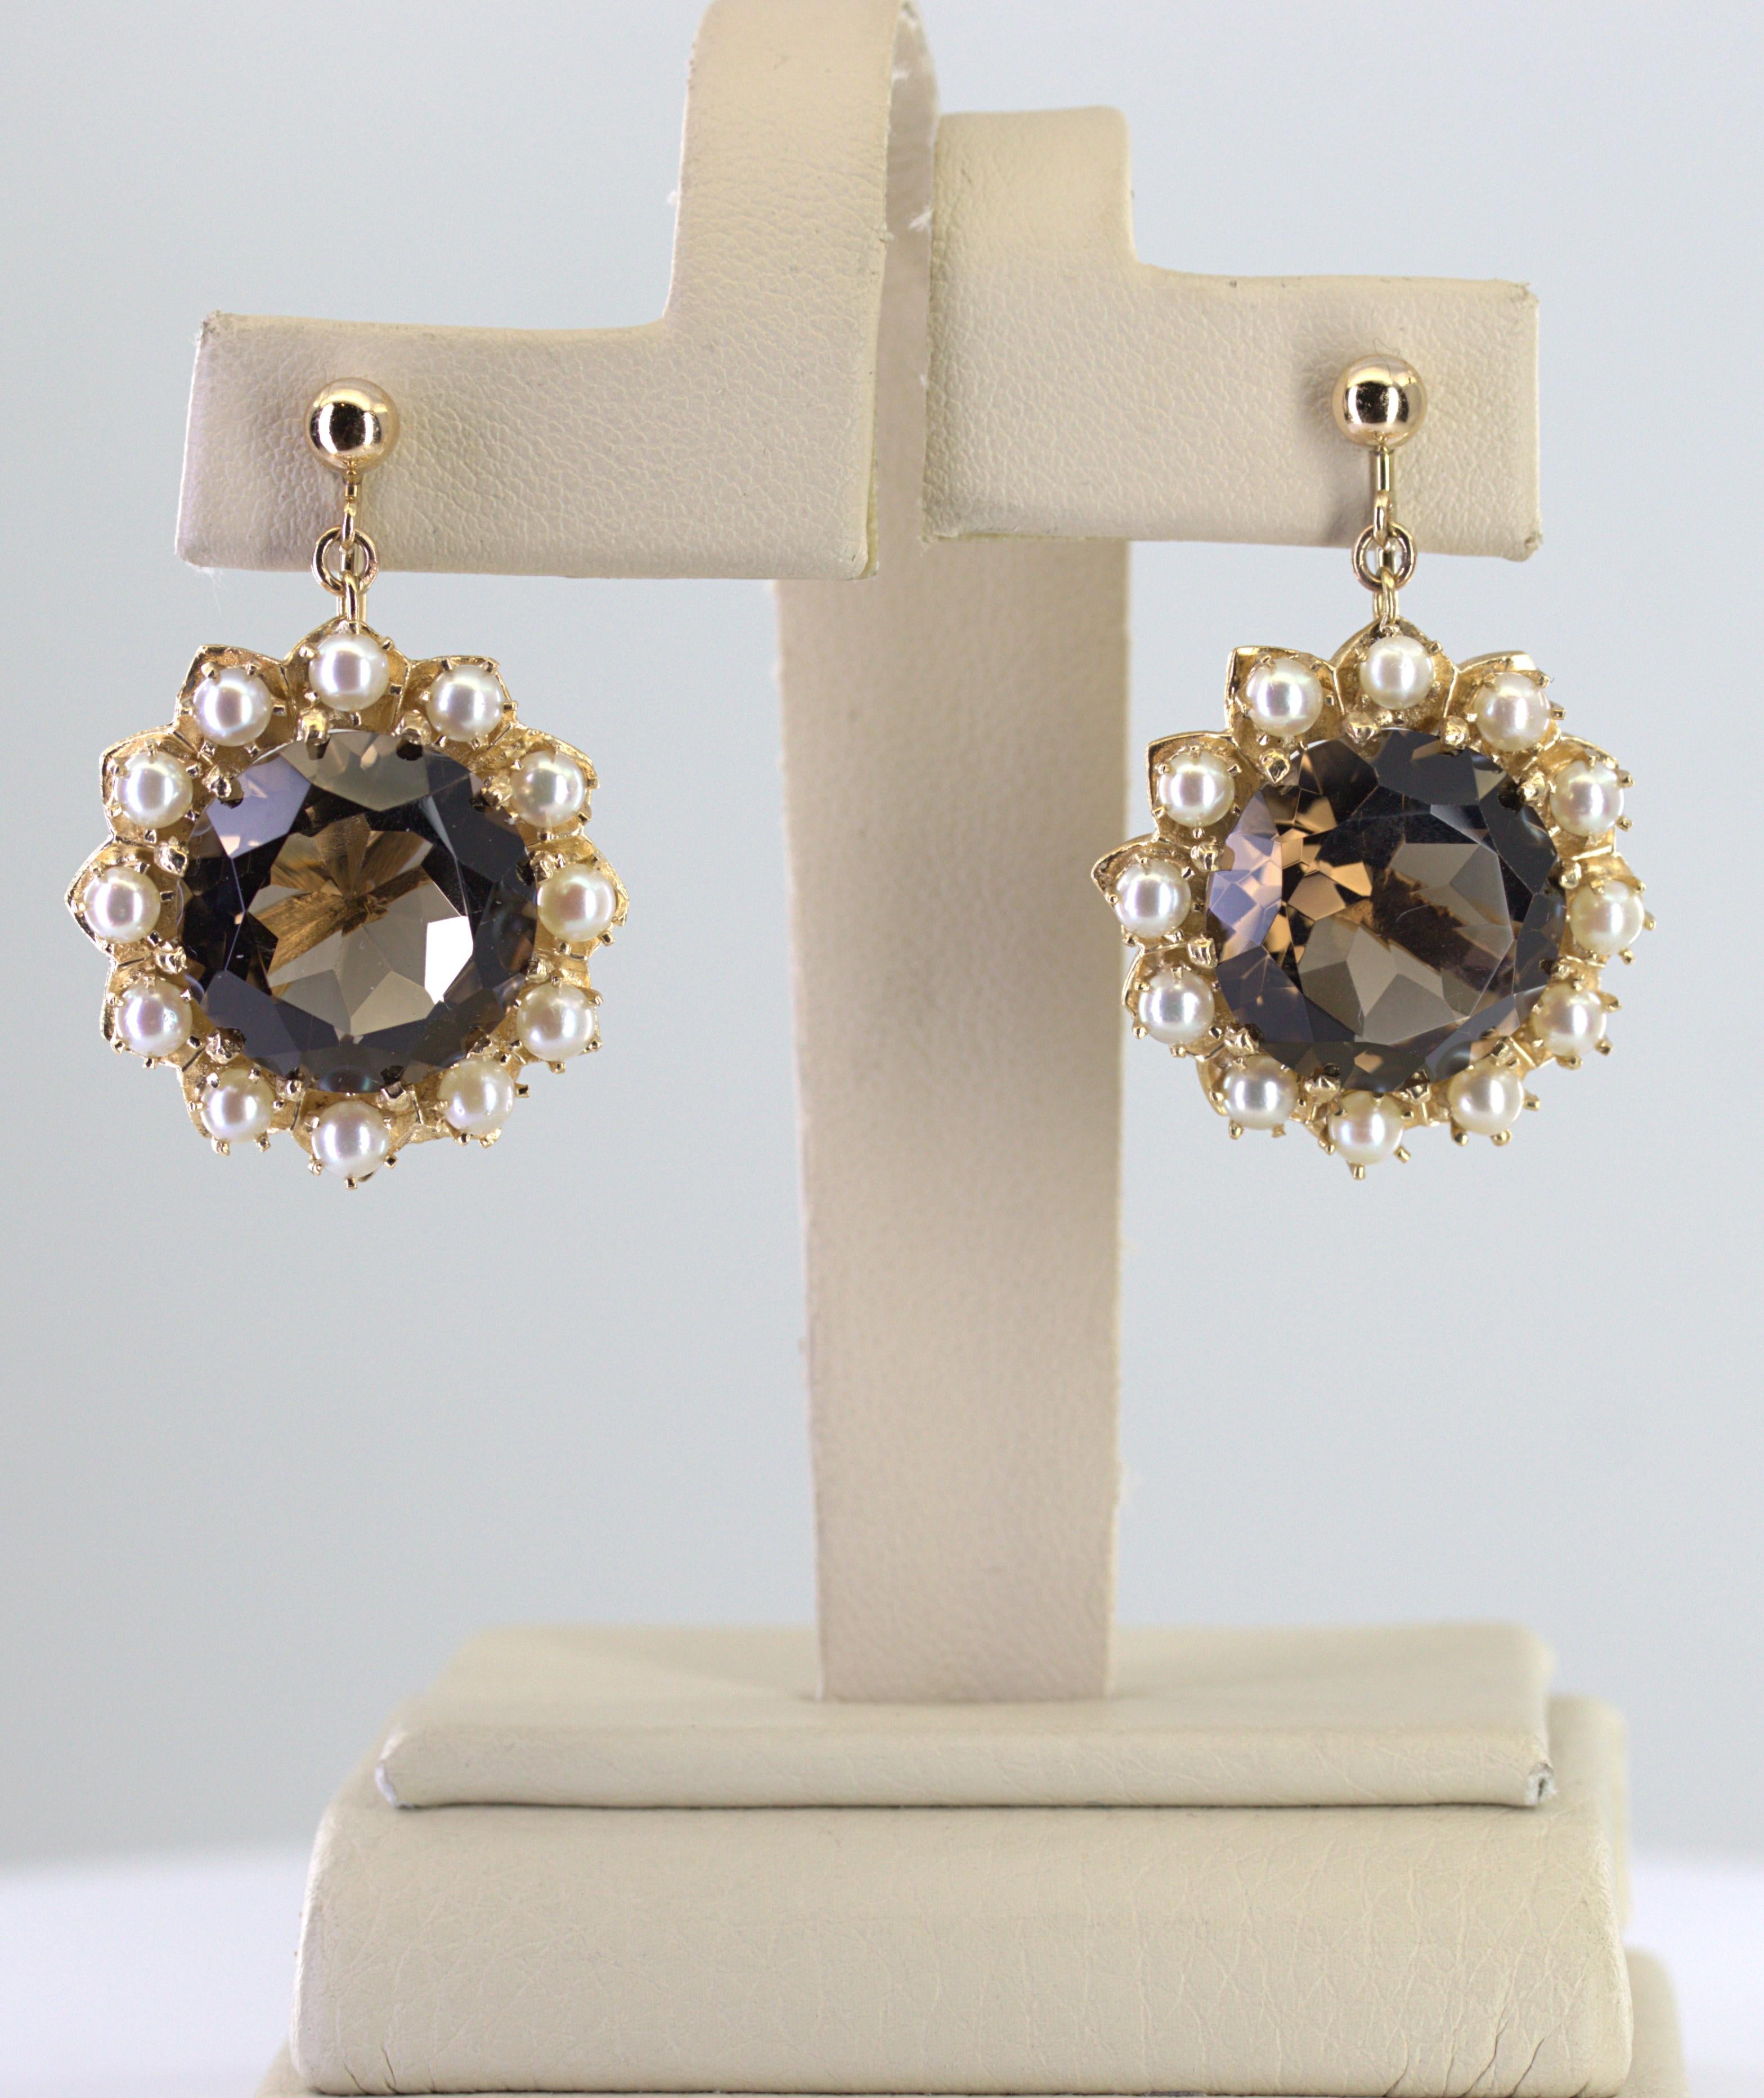 Featuring (2) round-cut smokey quartz, 10.00 cts. tw., surrounded by (24) round 3.6 mm cultured pearls set in a 14k yellow gold flower motif mounting, completed by a non-pierced screw back, 31.8 X 23.1 X 9.6 mm, marked 14K (backs), Gross weight